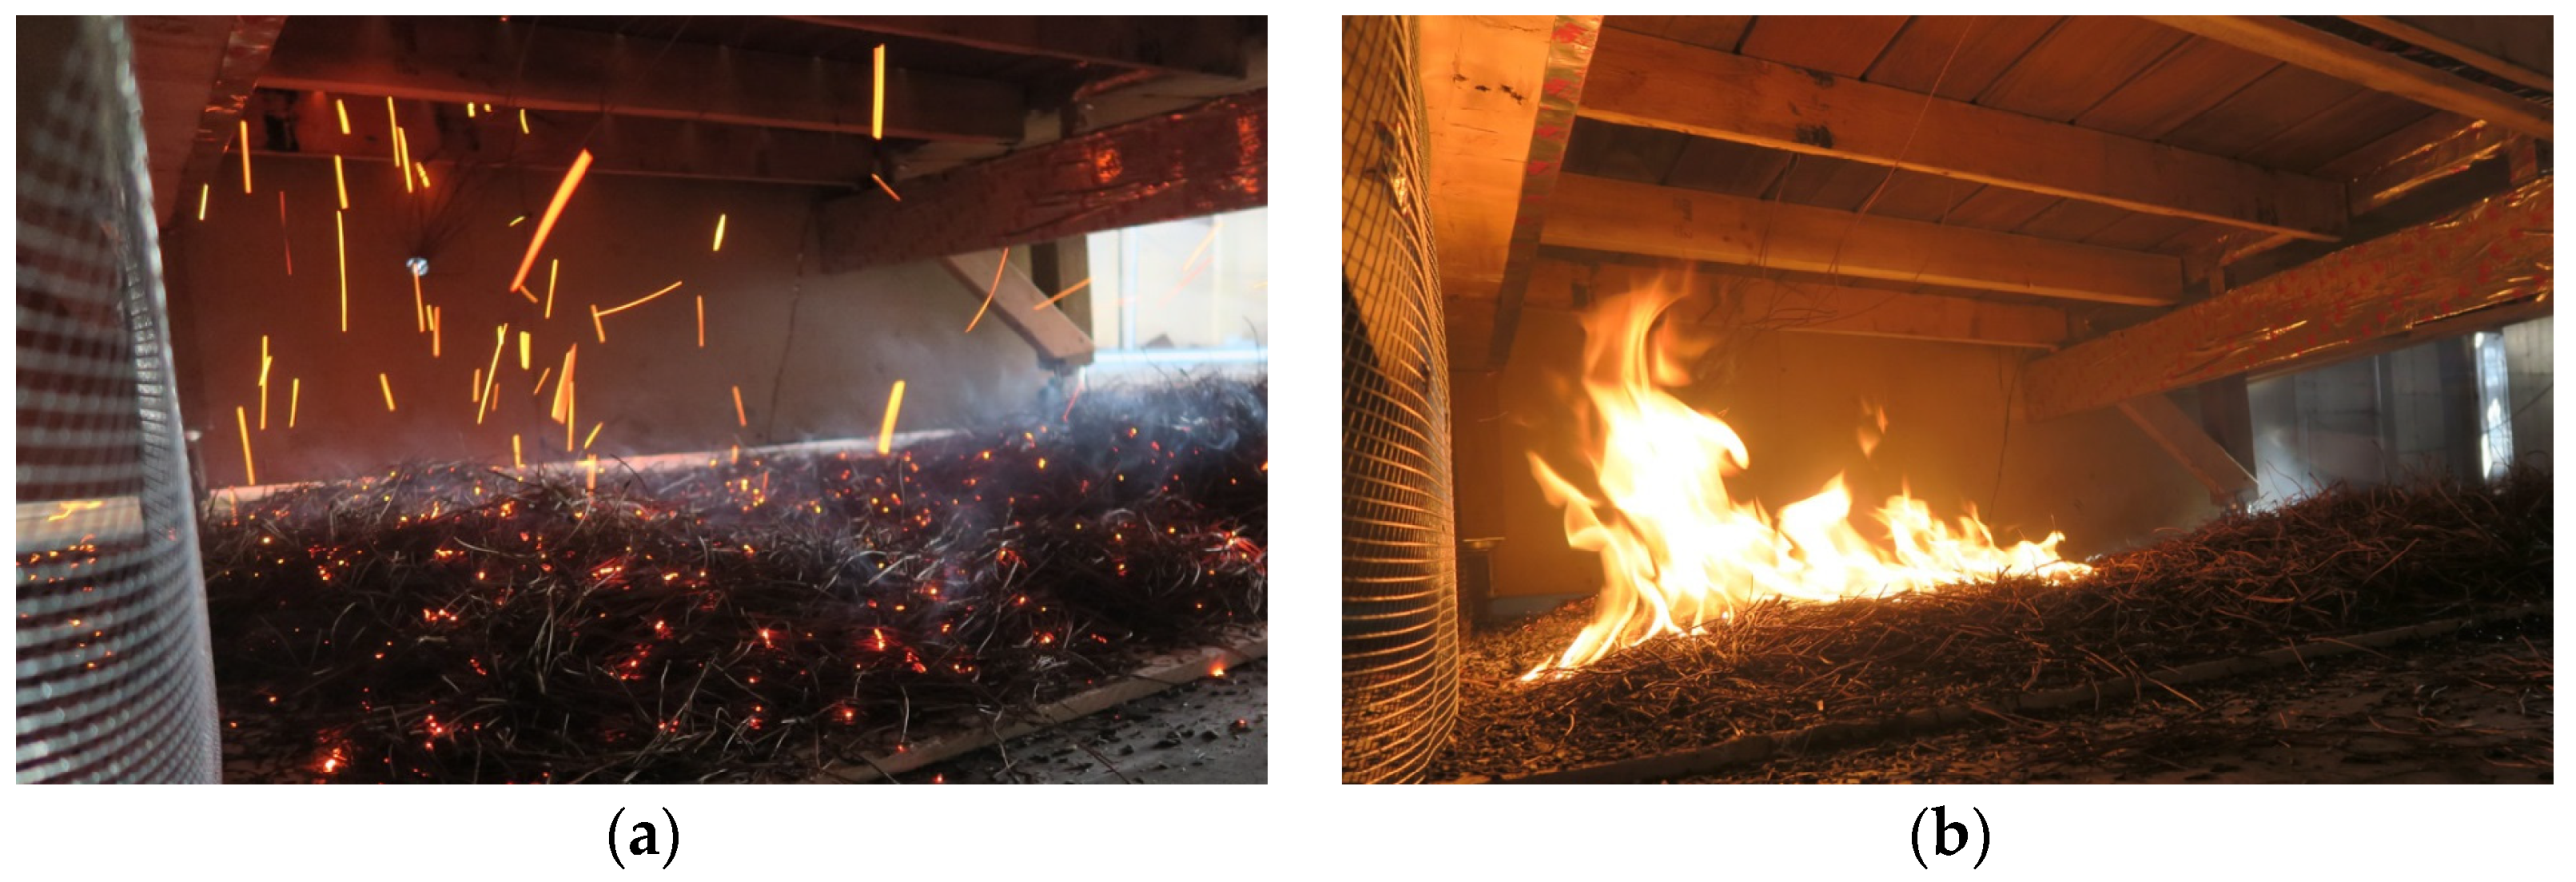 Fire | Free Full-Text | Evaluating Deck Fire Performance&mdash;Limitations  of the Test Methods Currently Used in California&rsquo;s Building Codes |  HTML